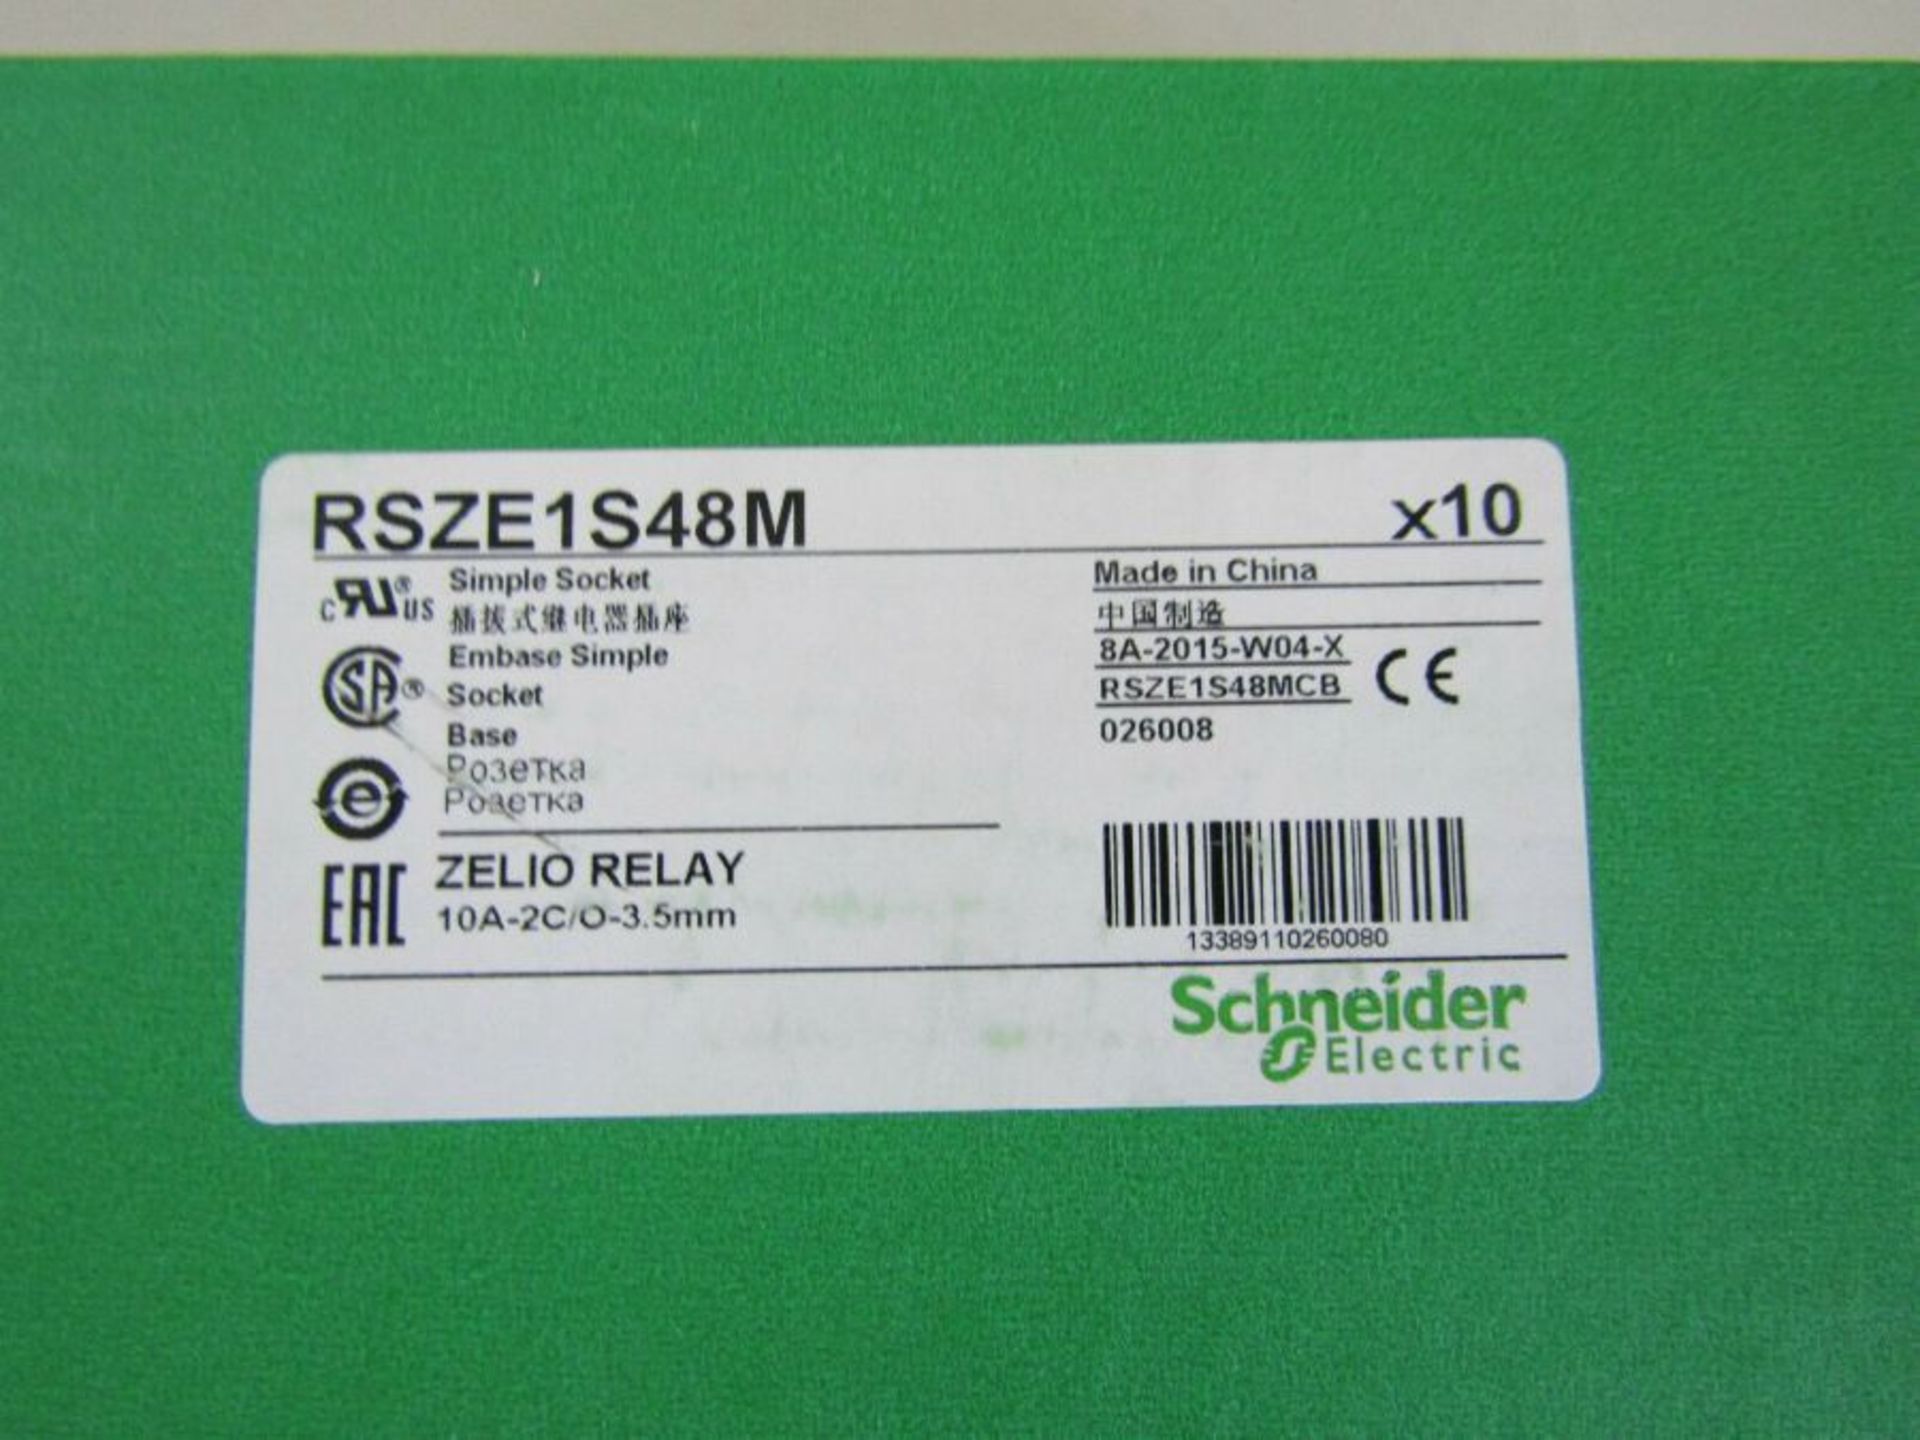 200 x SCHNEIDER RSZE1S48M Relay Socket for RSB Series - (20 boxes of 10) S2 - 8497667 - Image 6 of 6